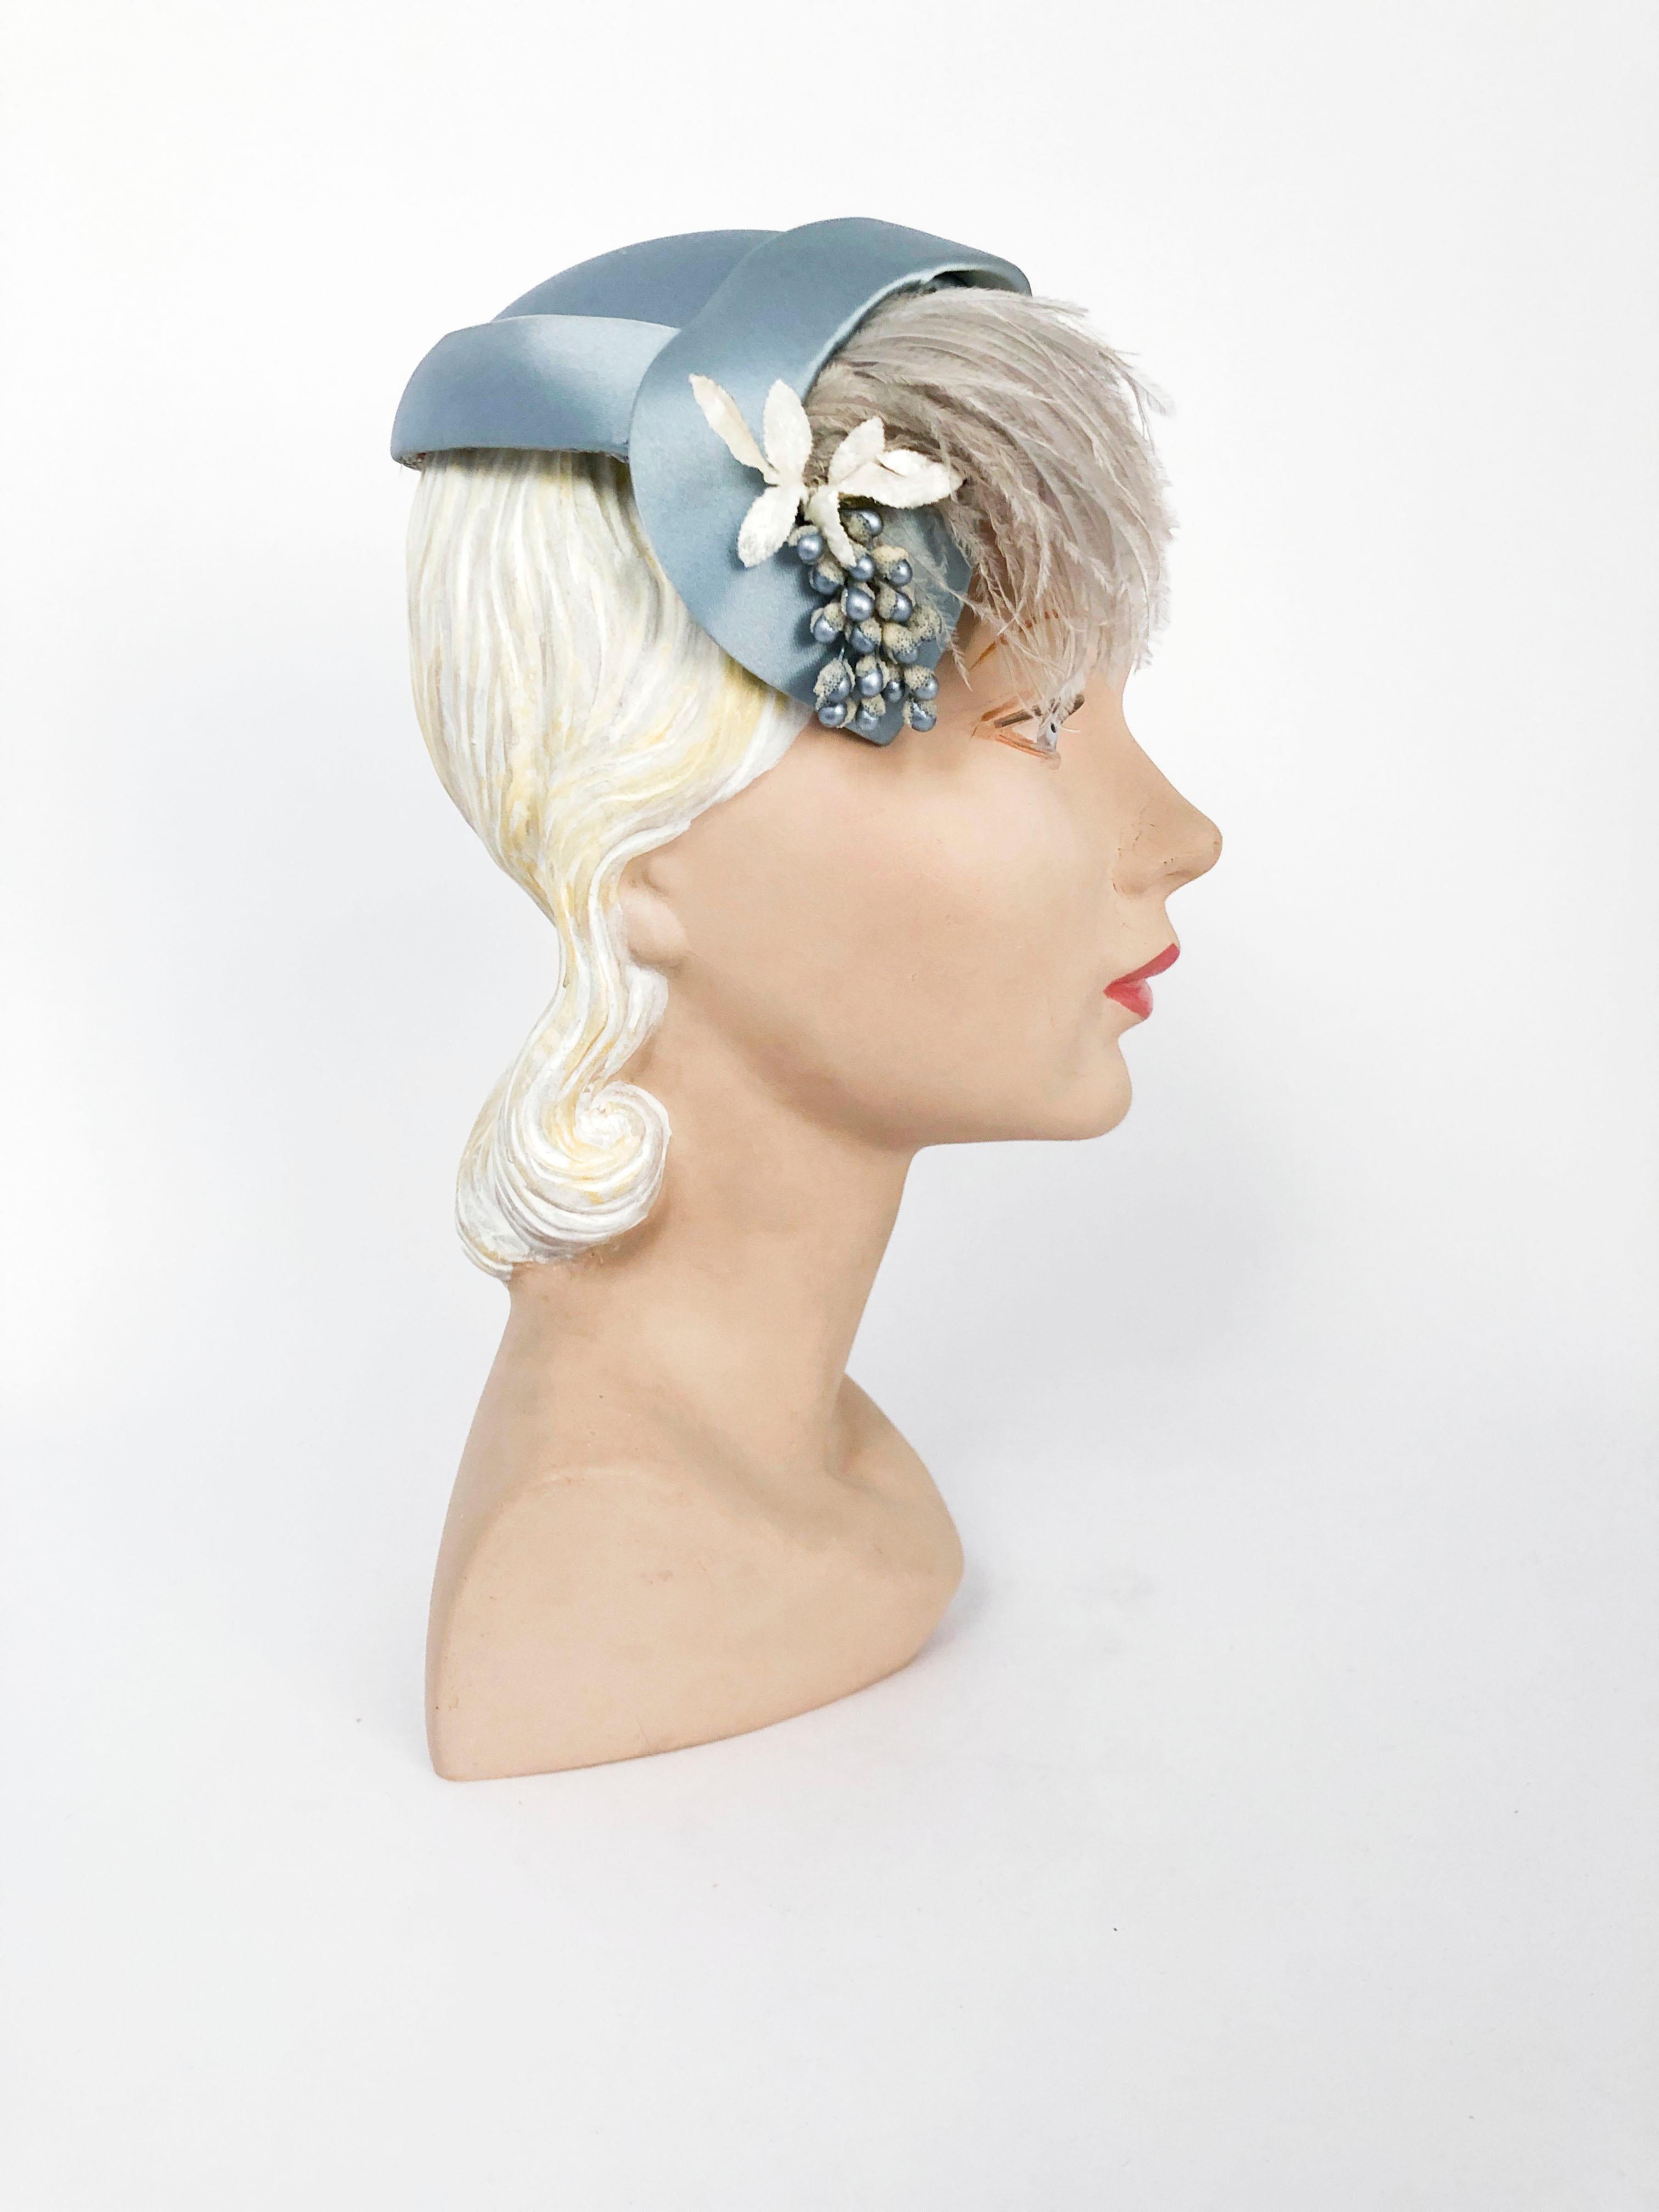 1950s Silk satin hat in powder blue with an asymmetrical shaping, velvet leaves, fruit accent, and feathered wisp. Combs on the band to further secure the hat to the head